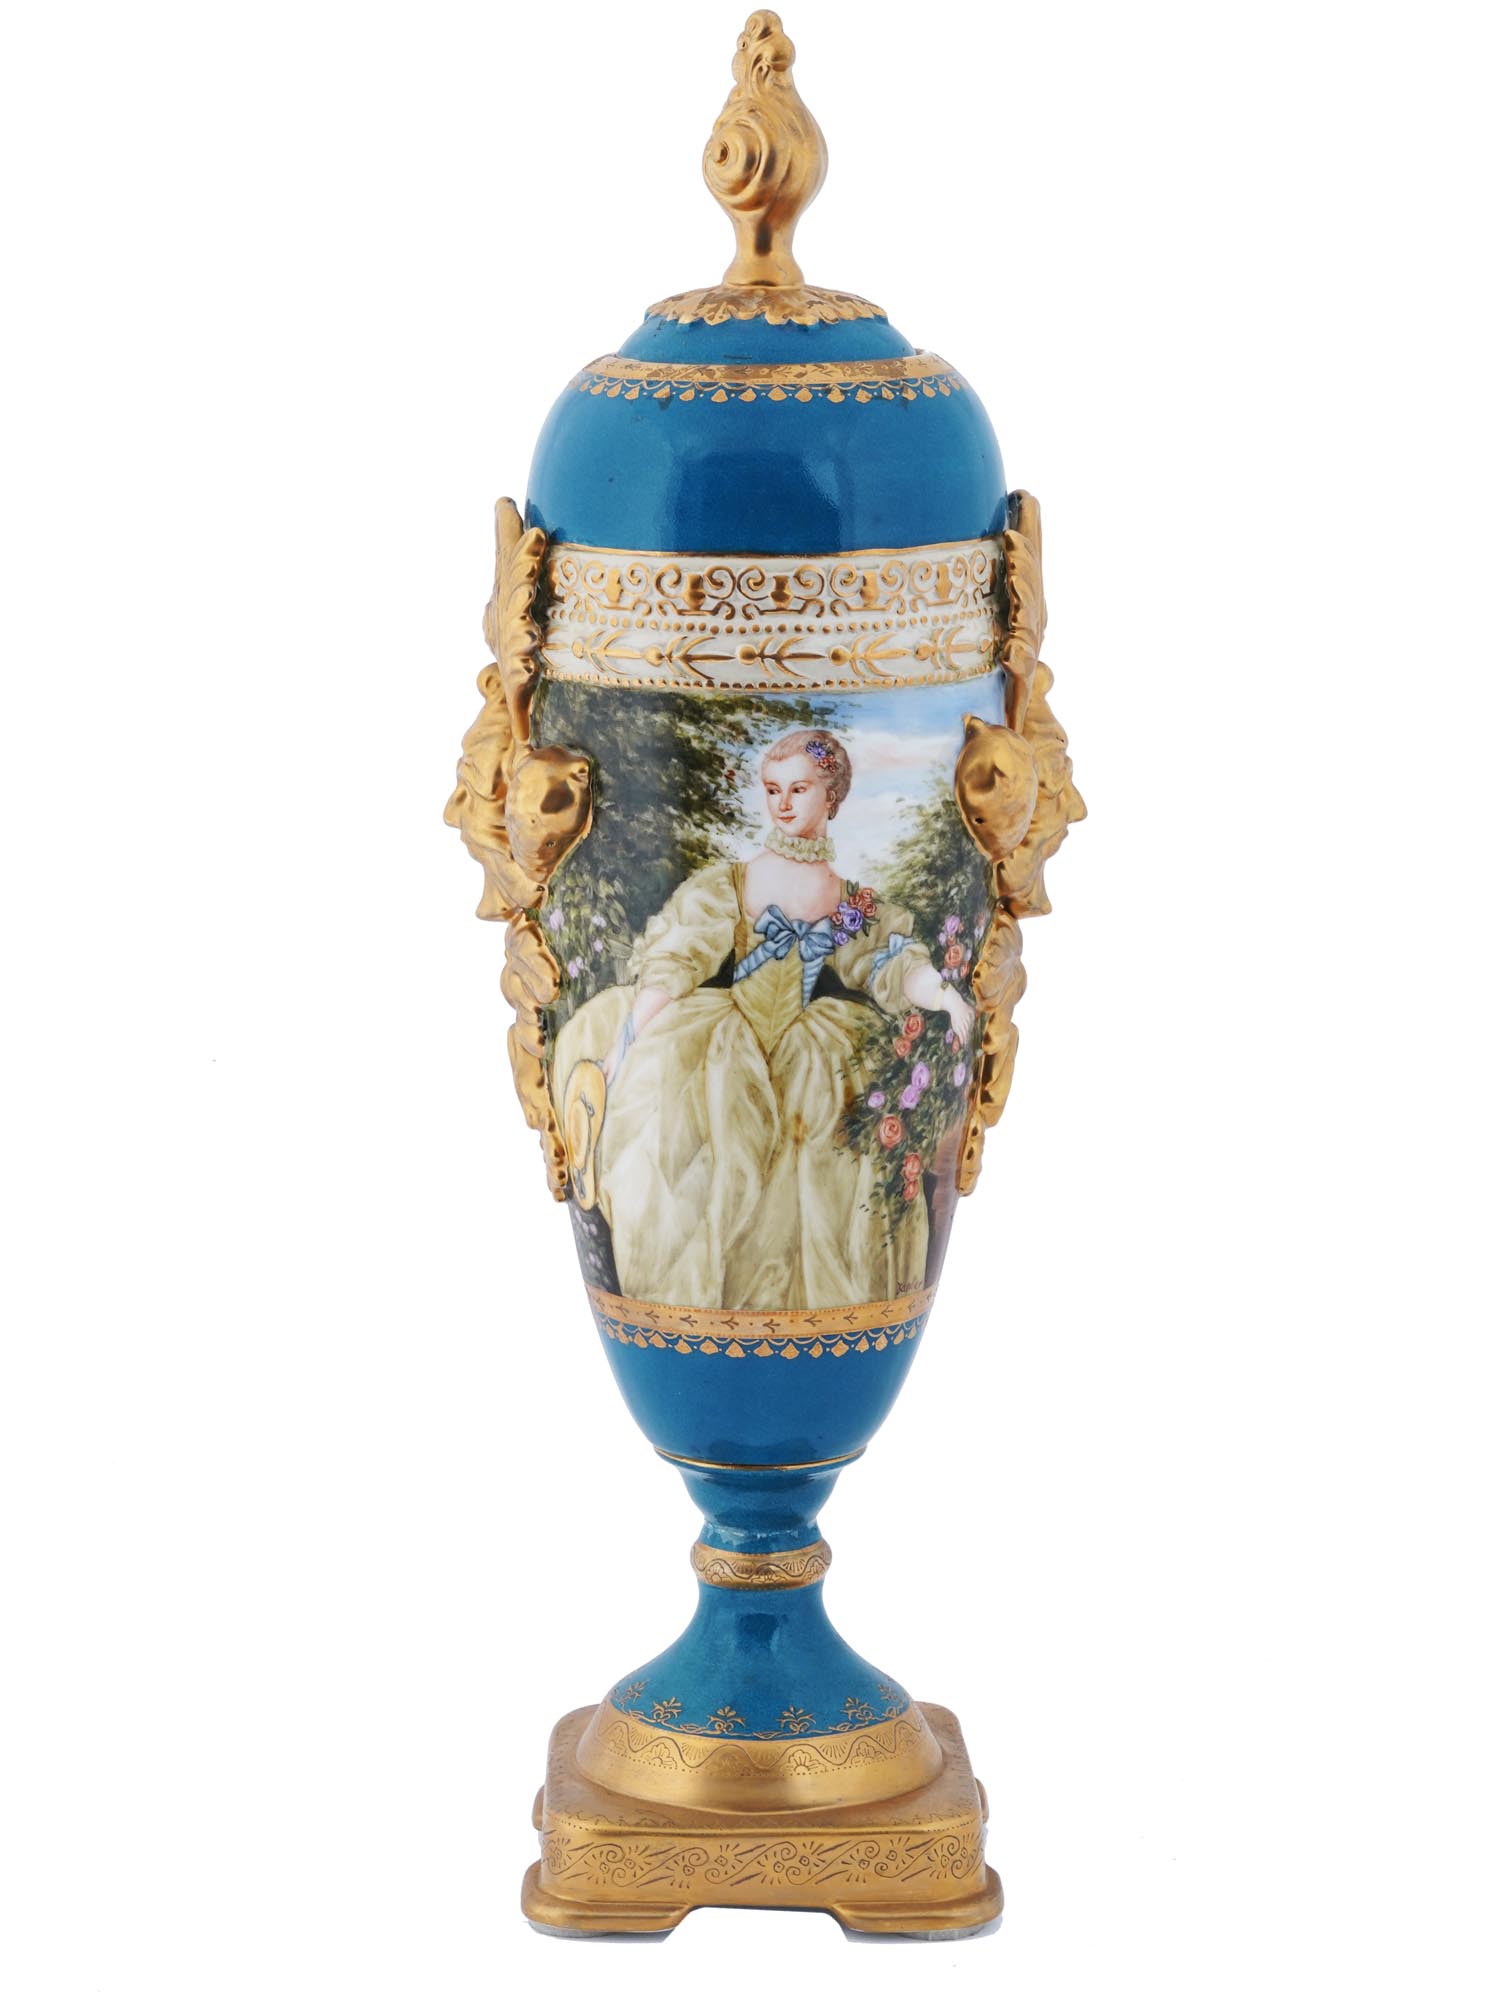 TALL FRENCH STYLE PORTRAITS GILT PORCELAIN VASE PIC-1